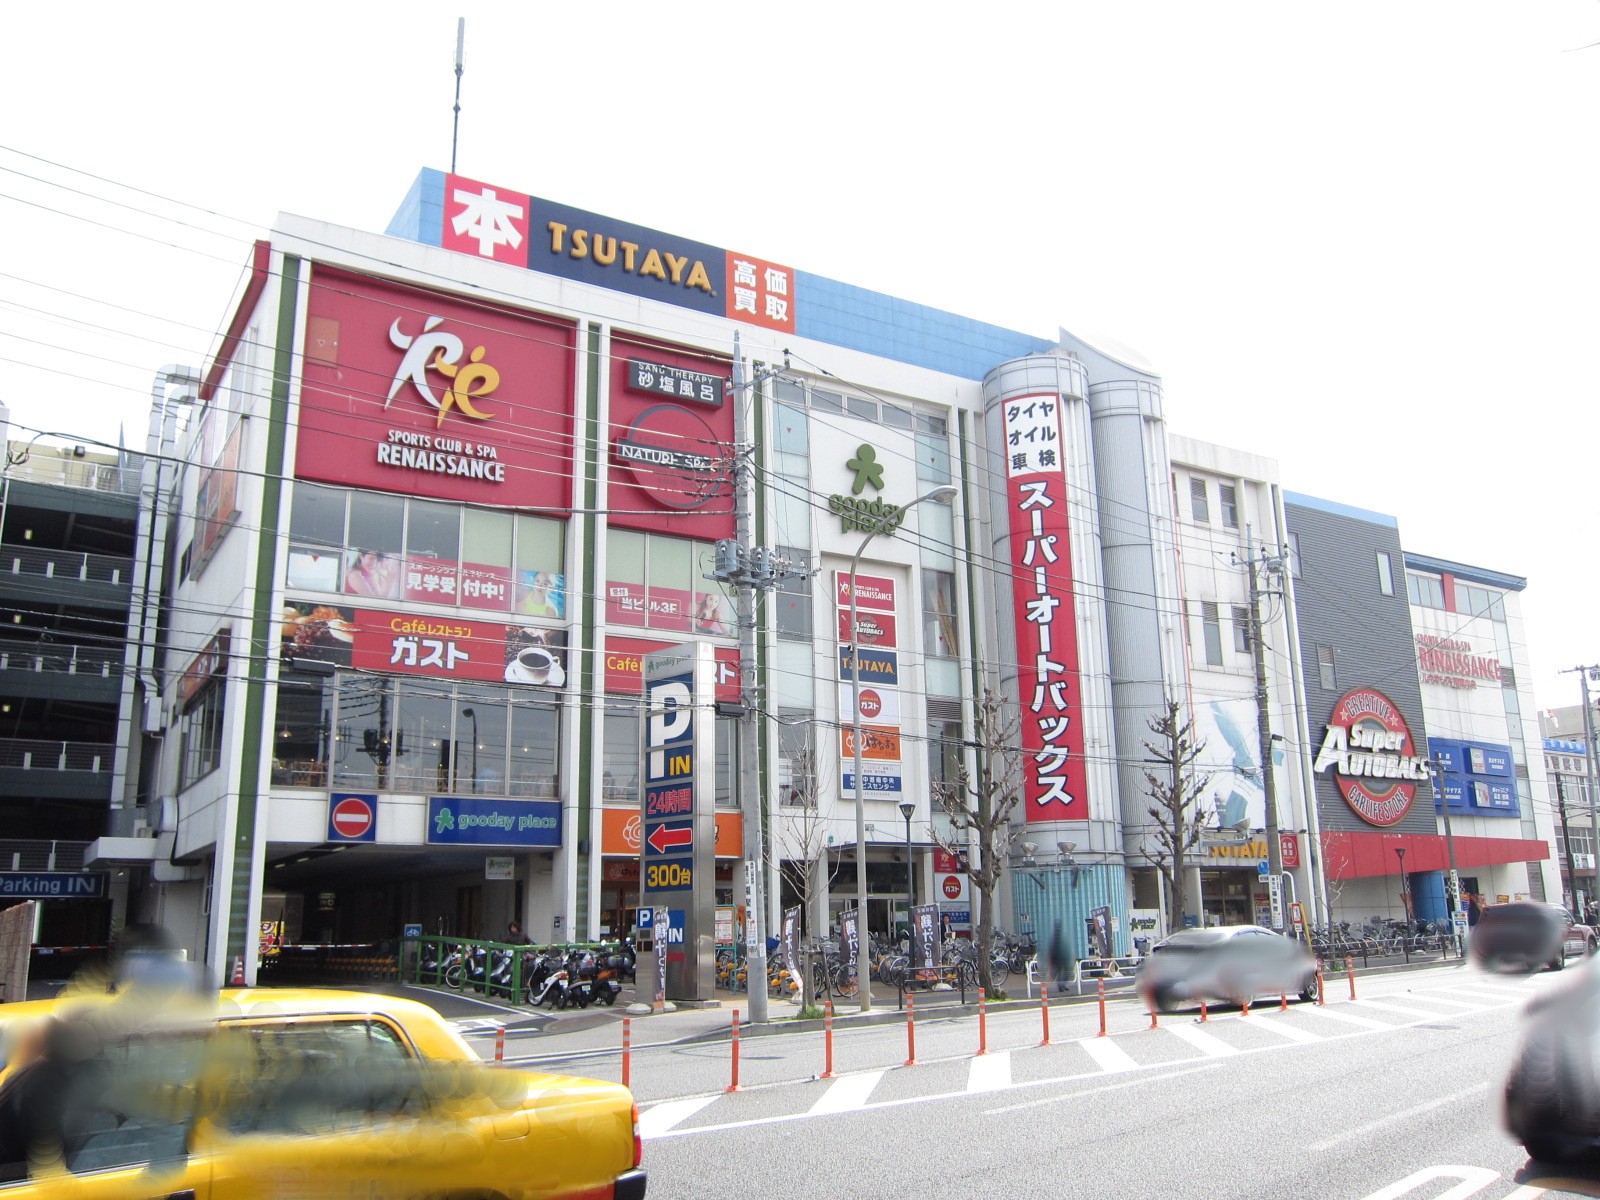 Shopping centre. Goody 1180m until the Place (shopping center)